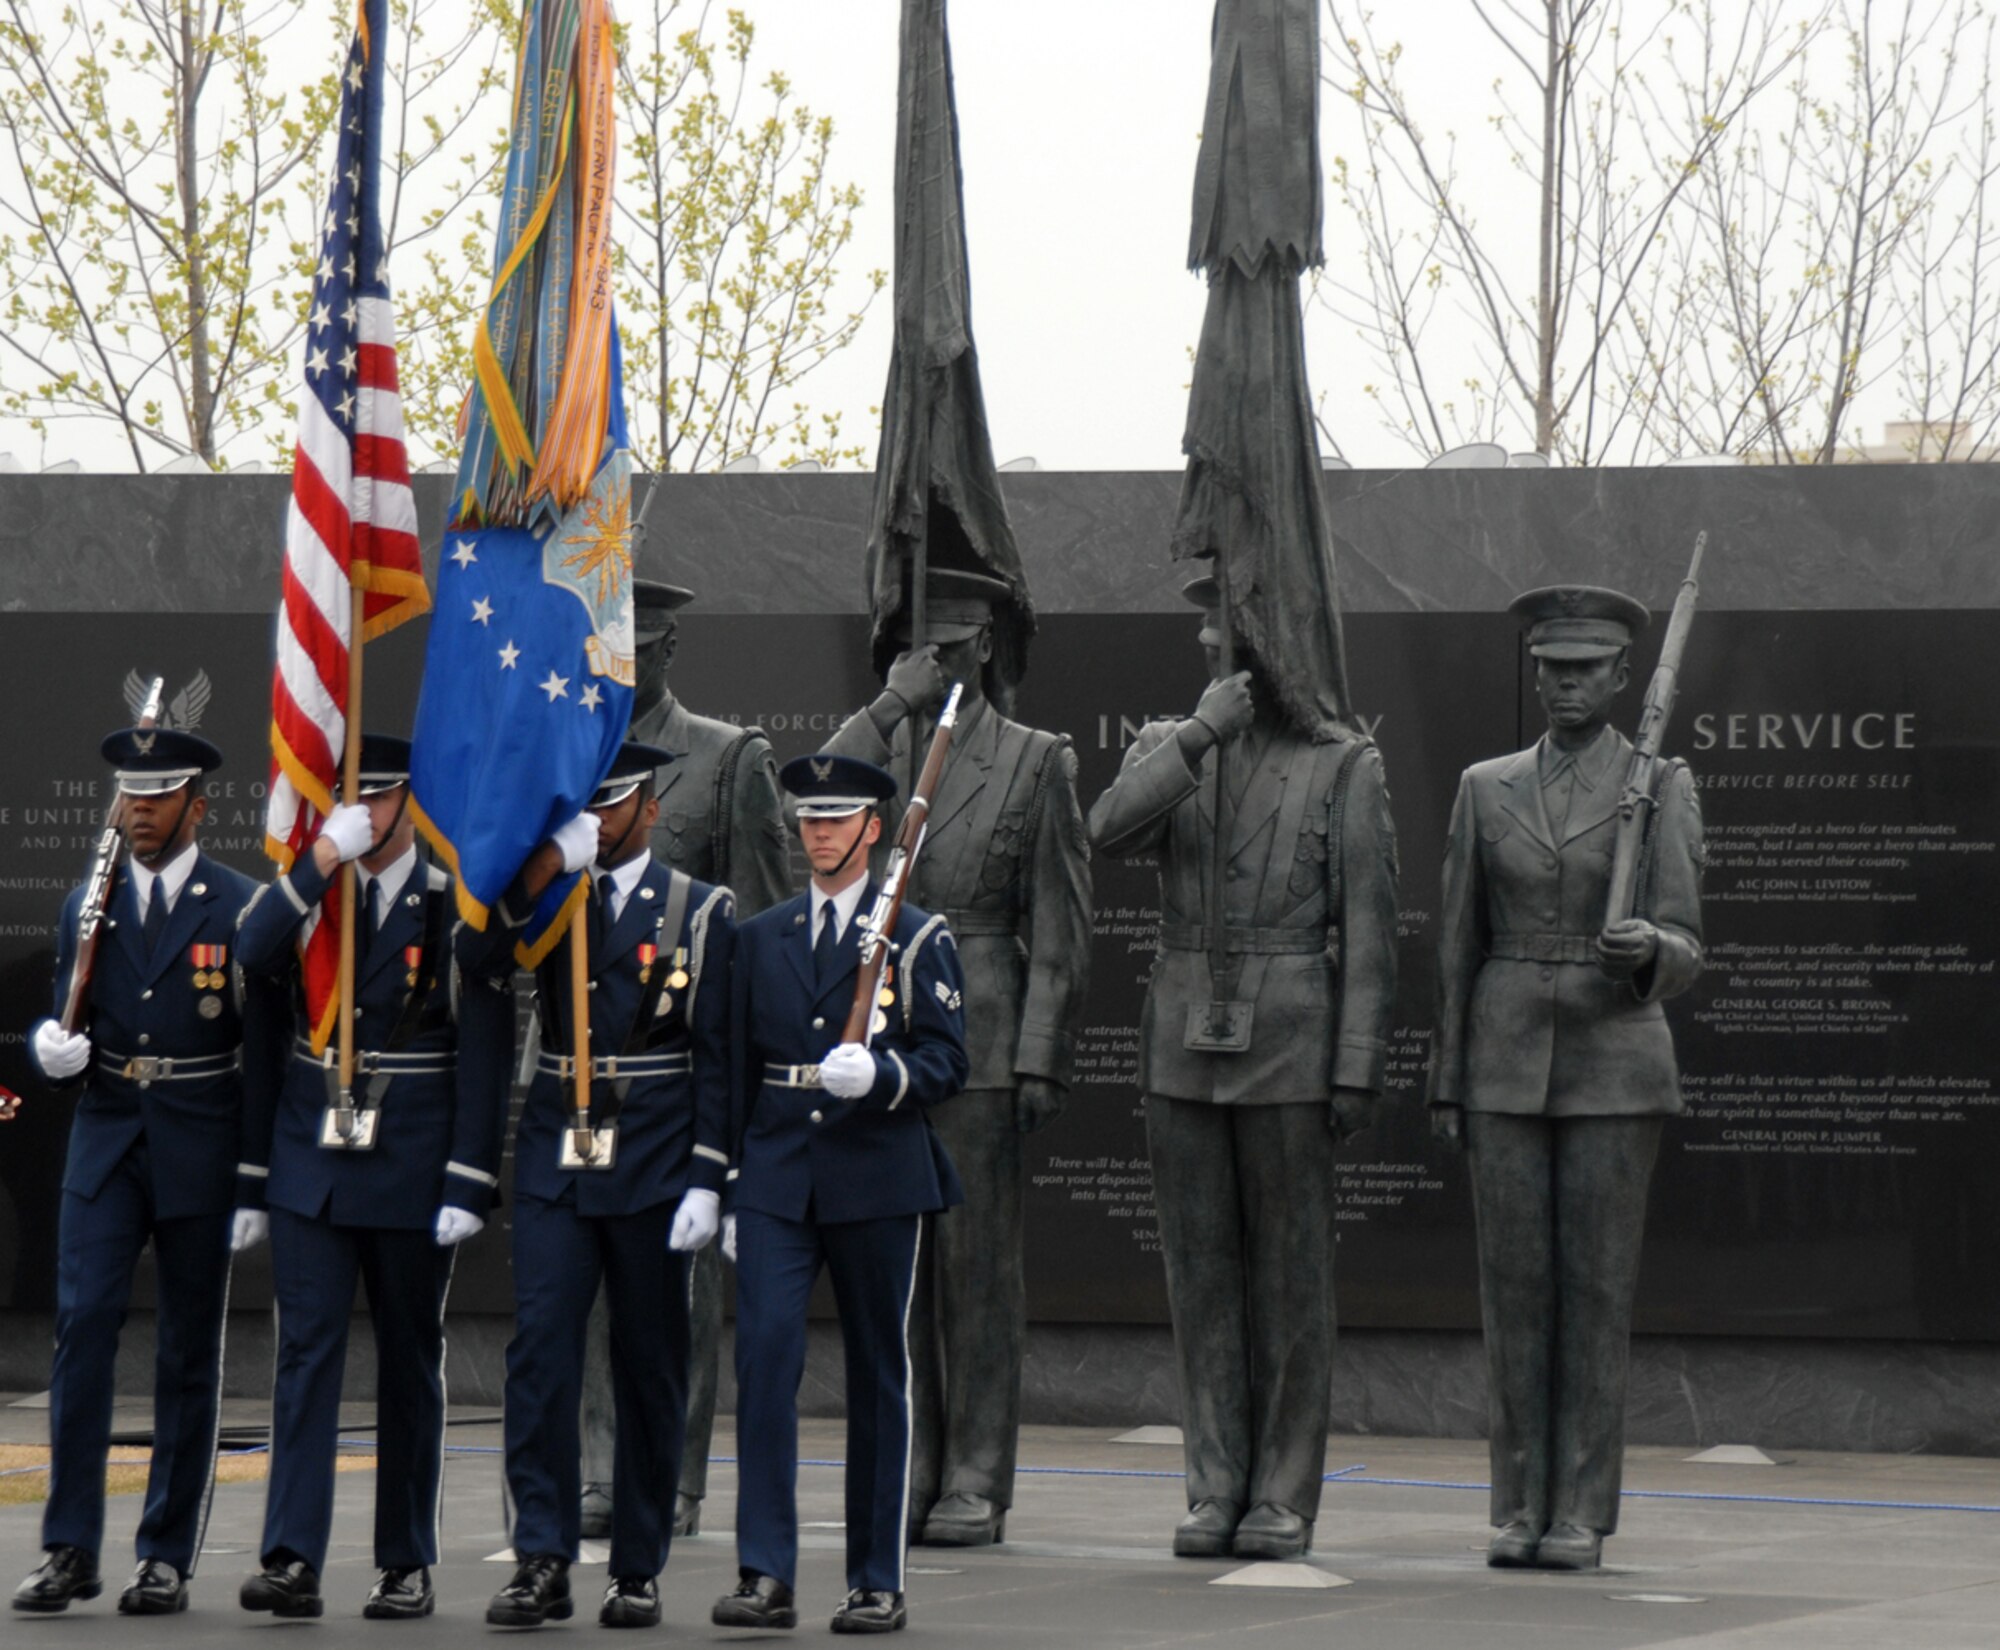 ARLINGTON, Va. --A color team from the Air Force Honor Guard presents the colors as part of the Air Force Review ceremony April 14 at the Air Force Memorial.  Maj. Gen. Robert Smolen, Air Force District of Washington commander, was the event host as well as the reviewing official.